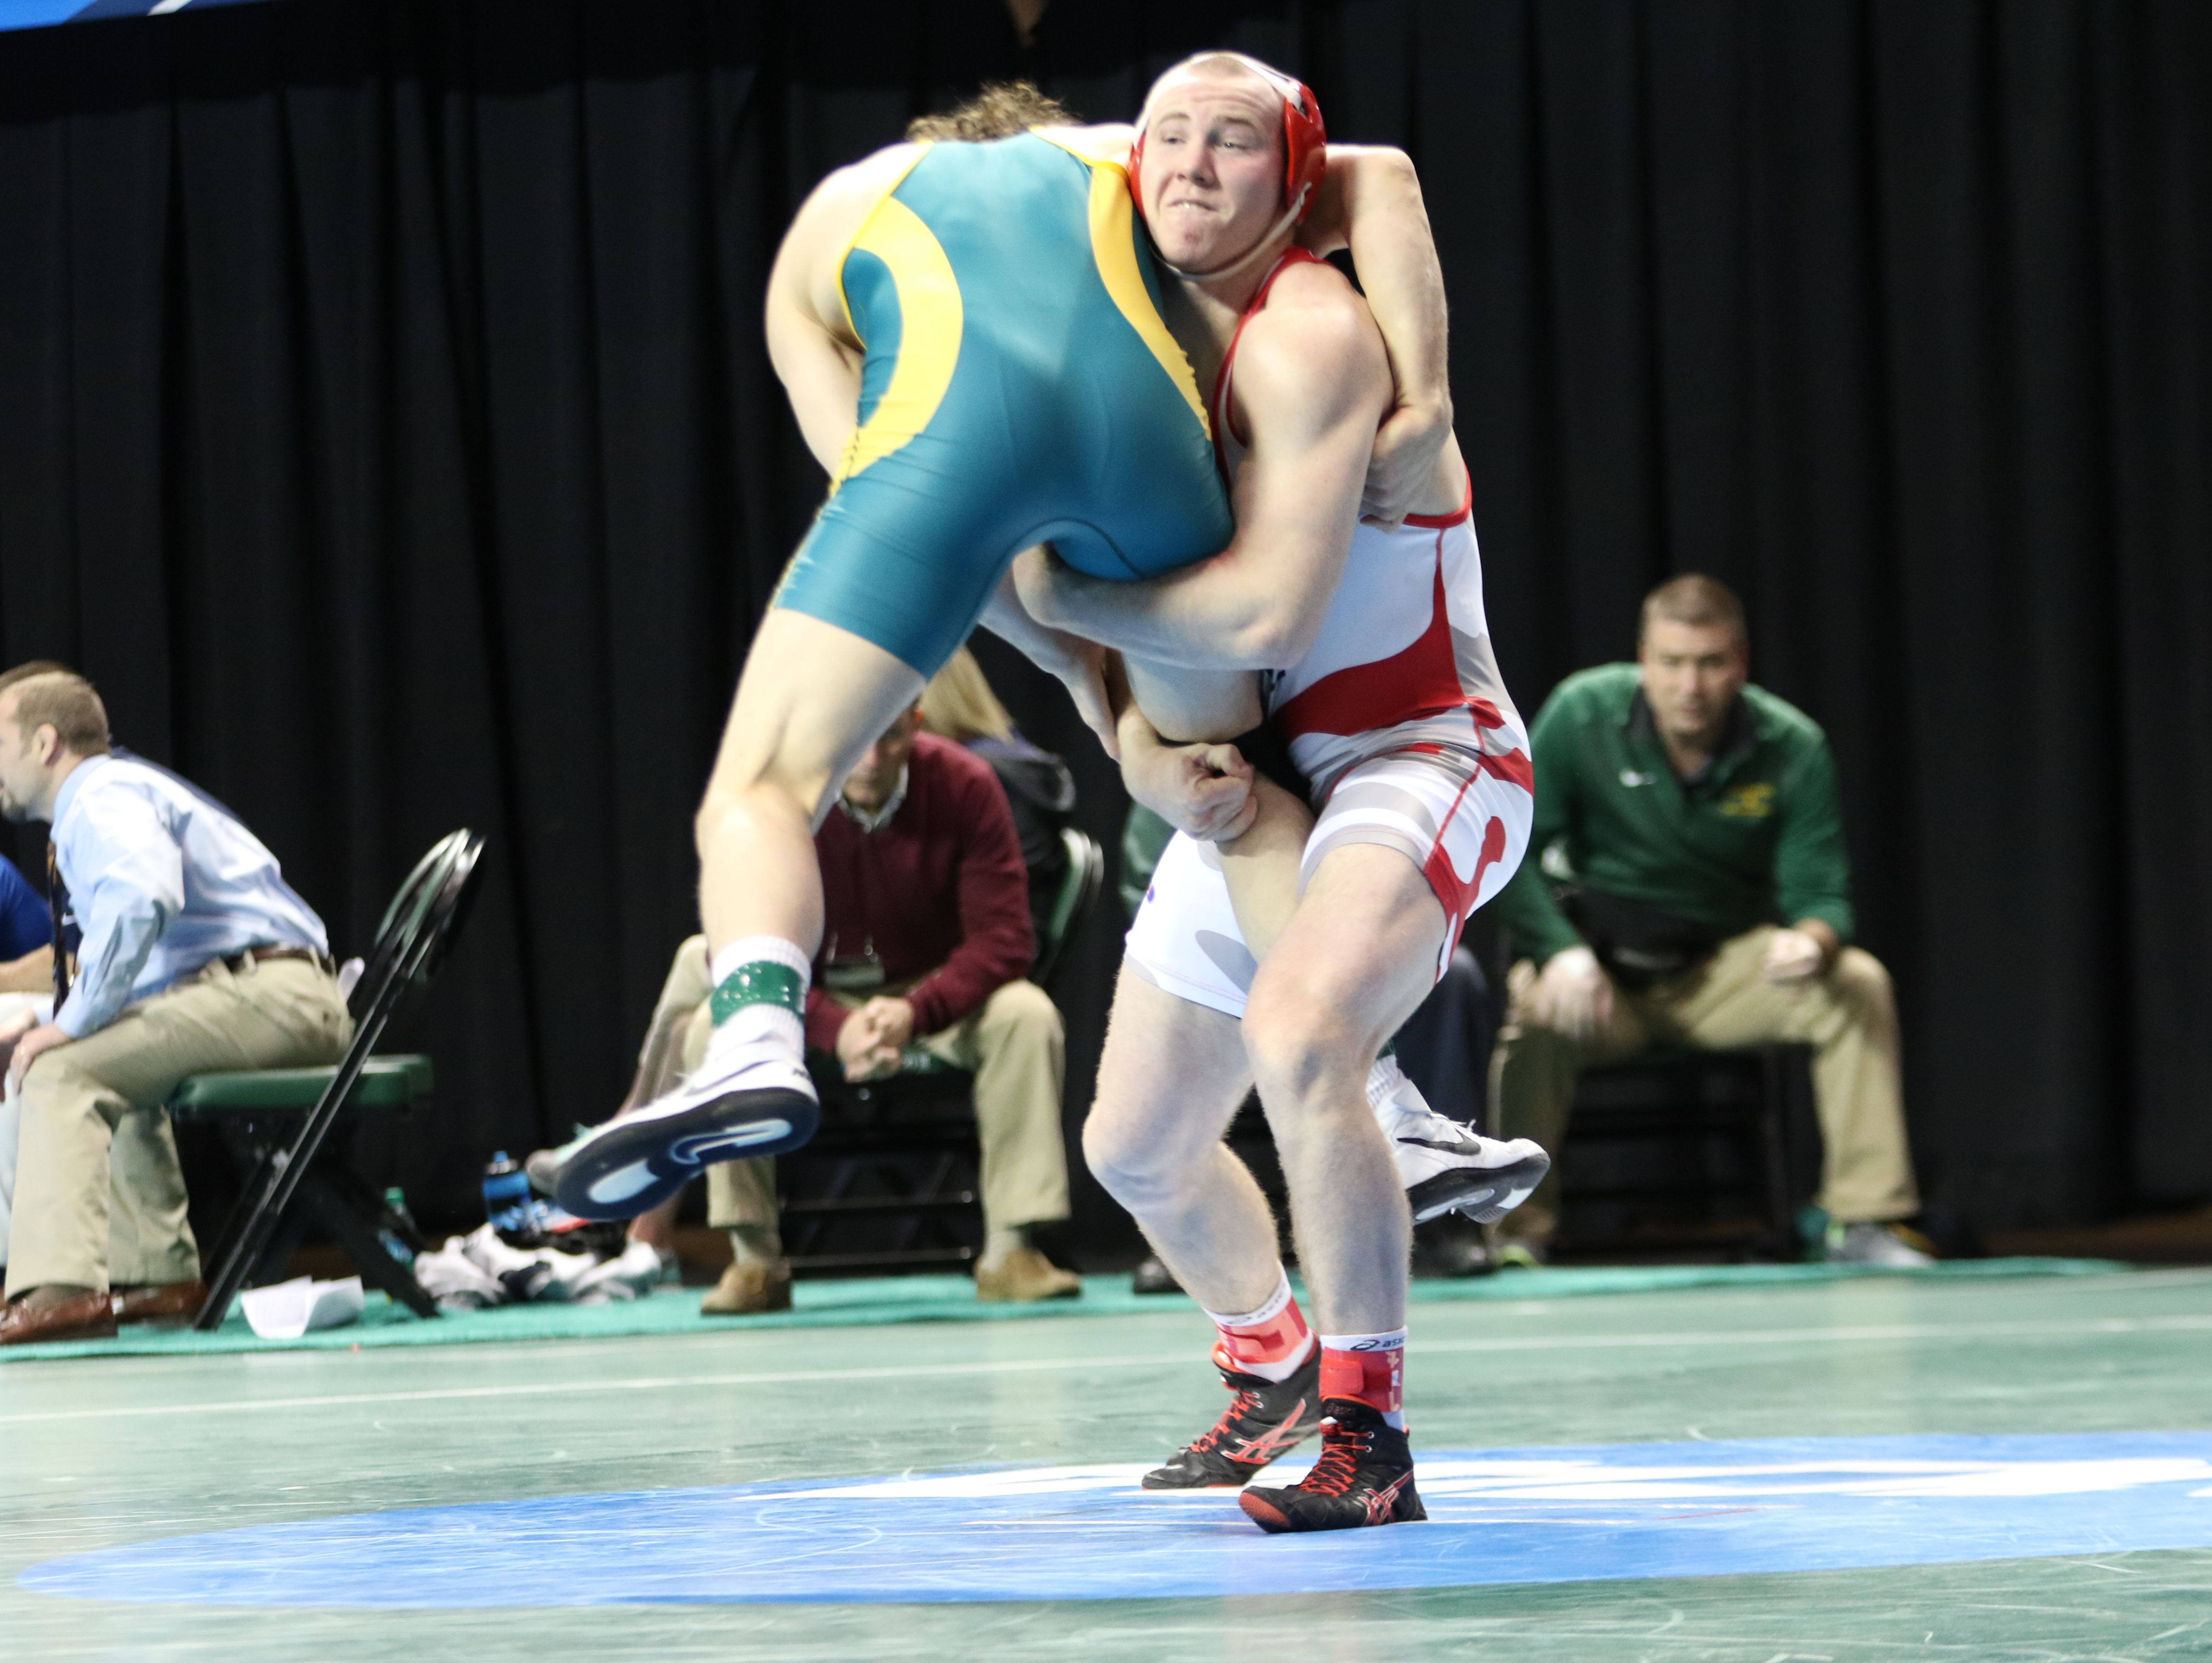 Riley Lefever of Wabash at the US Cellular Arena in Cedar Rapids Iowa at the 2016 NCAA Division III National Championship on March 11, 2016.